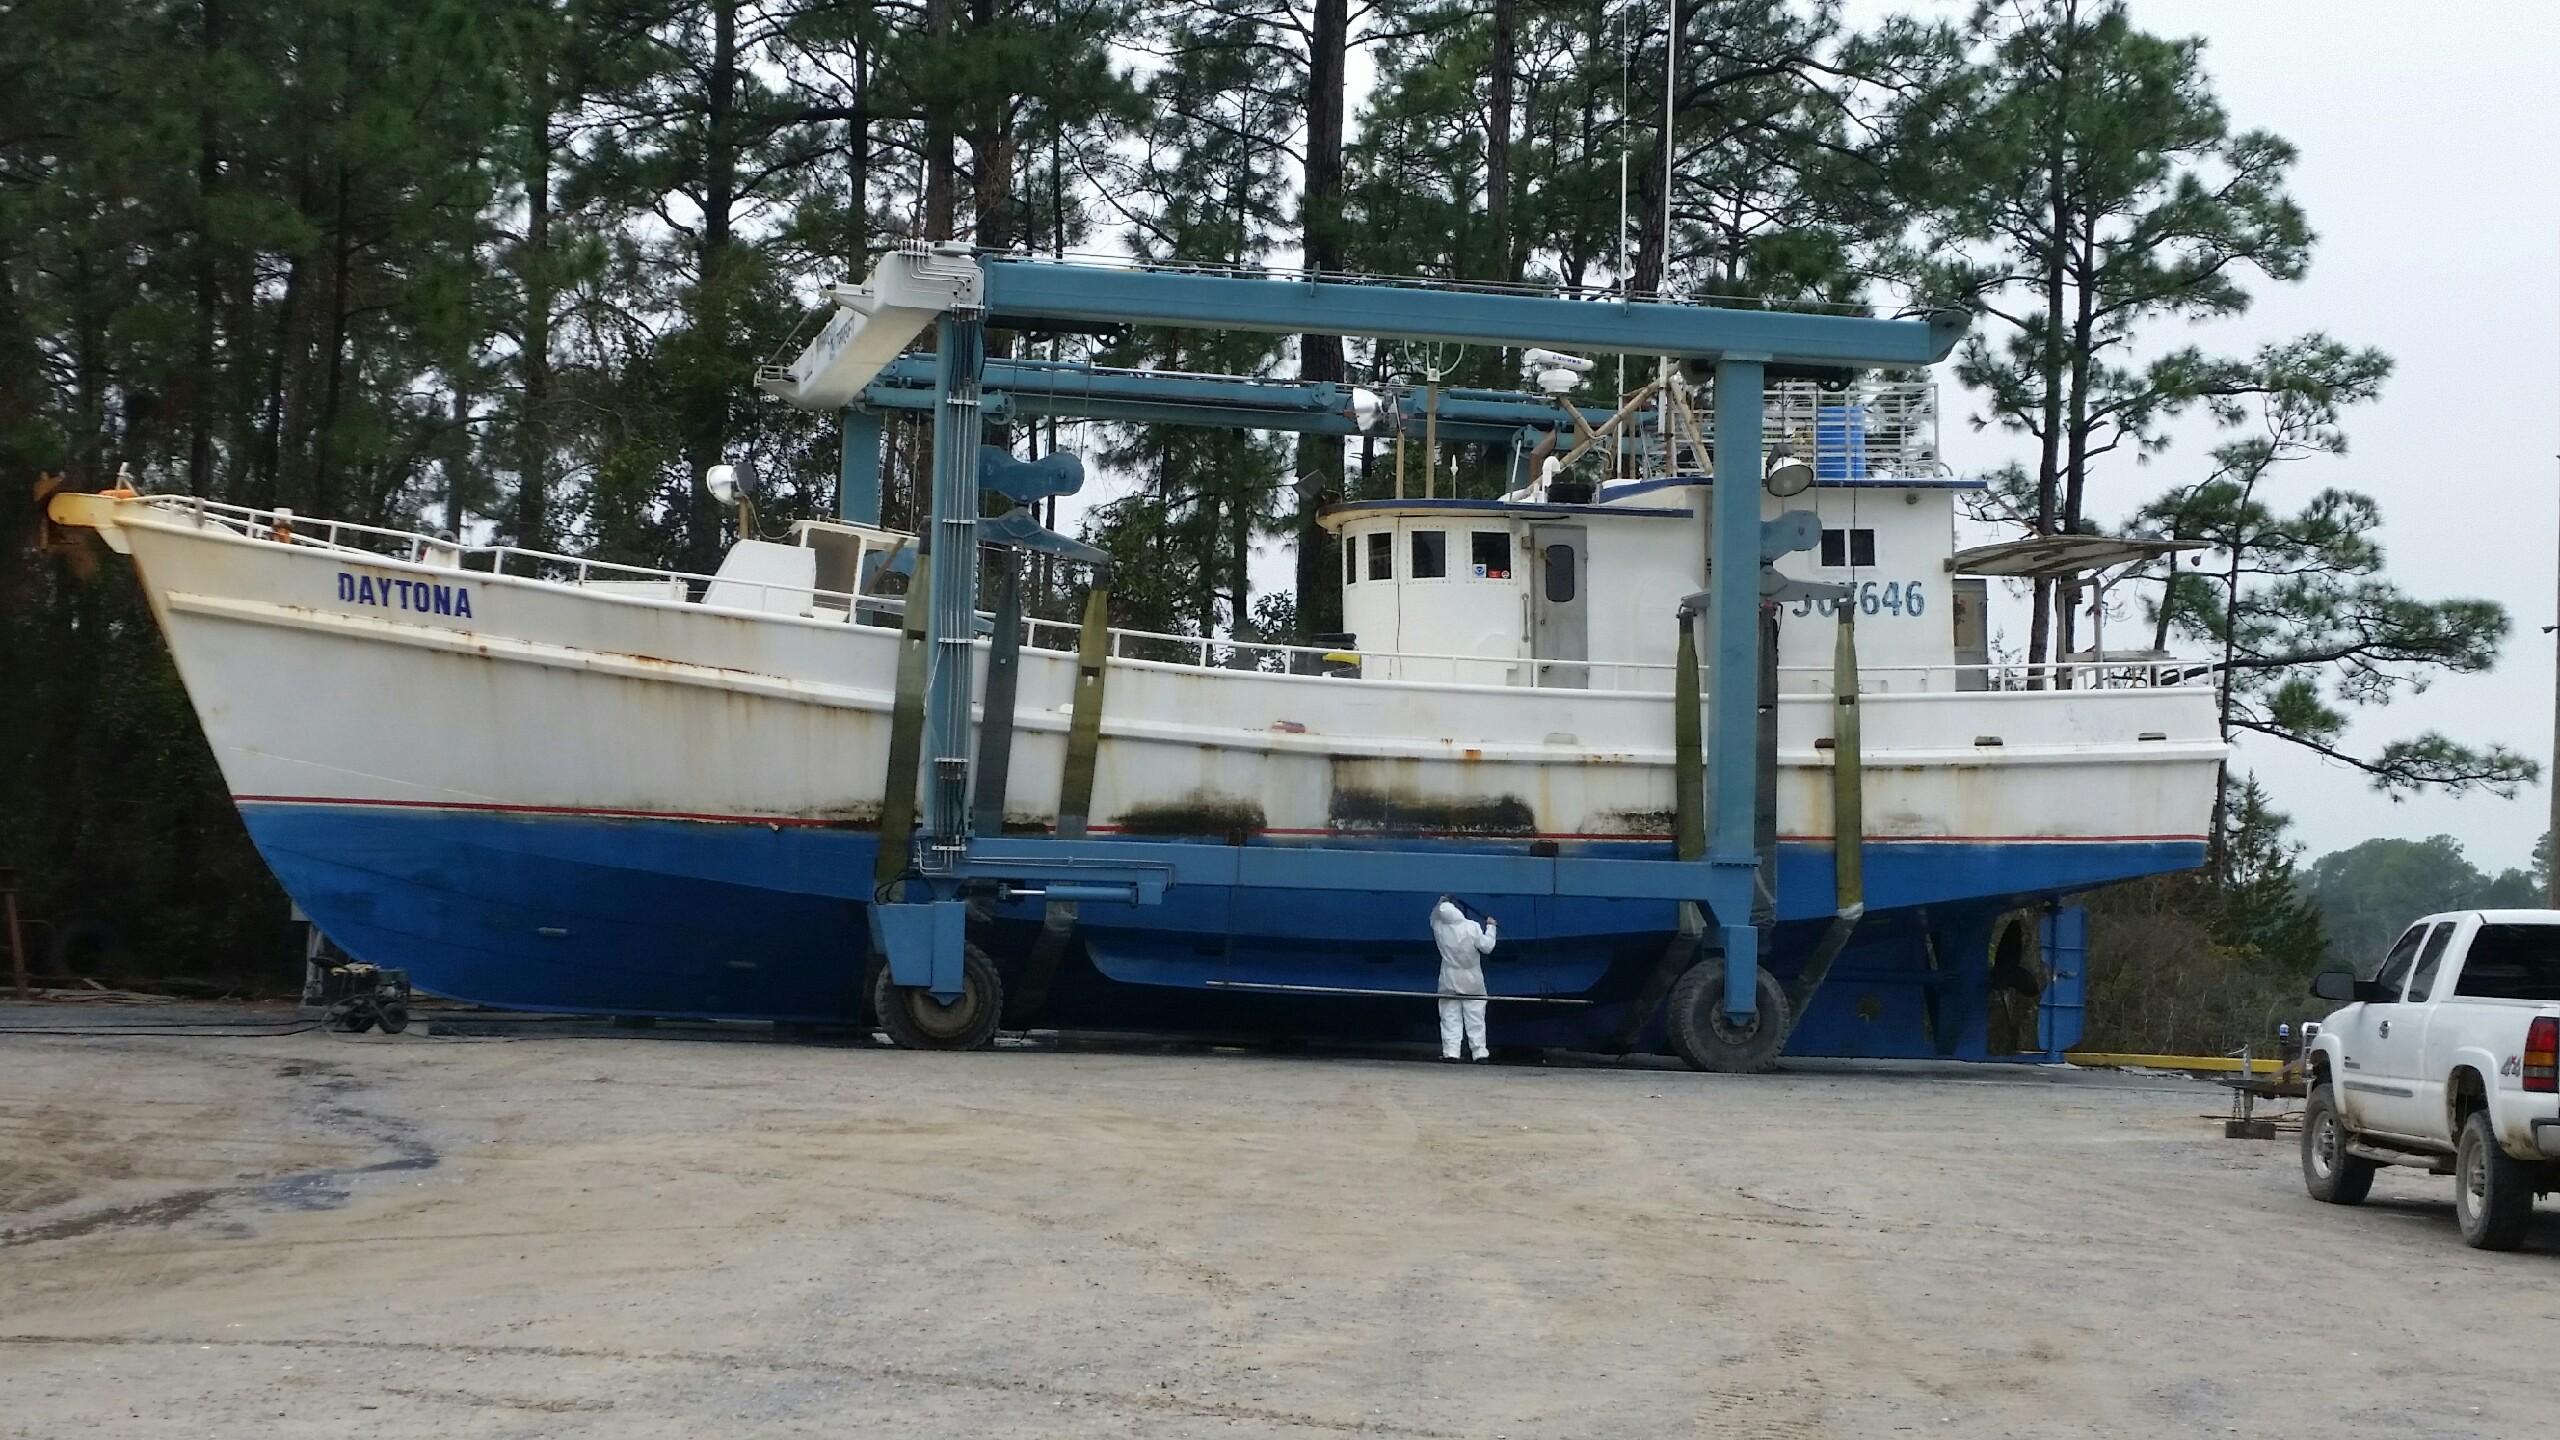 Miller Marine provides commercial services for commercial vessels in Bay County Florida